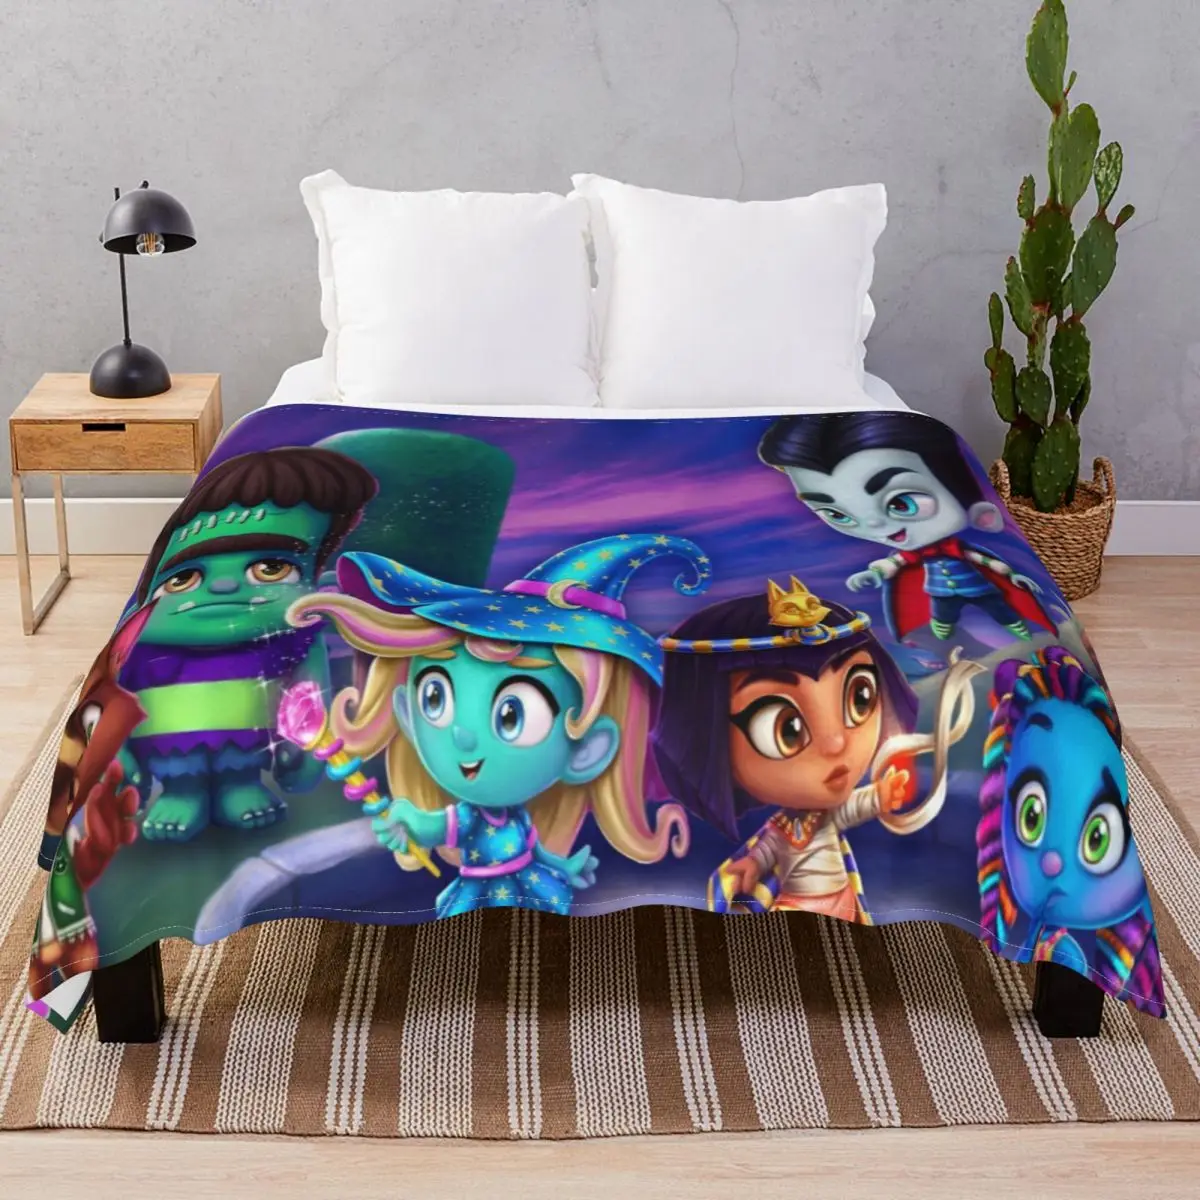 Super Monsters Blankets Flannel Textile Decor Multifunction Throw Blanket for Bed Home Couch Travel Cinema